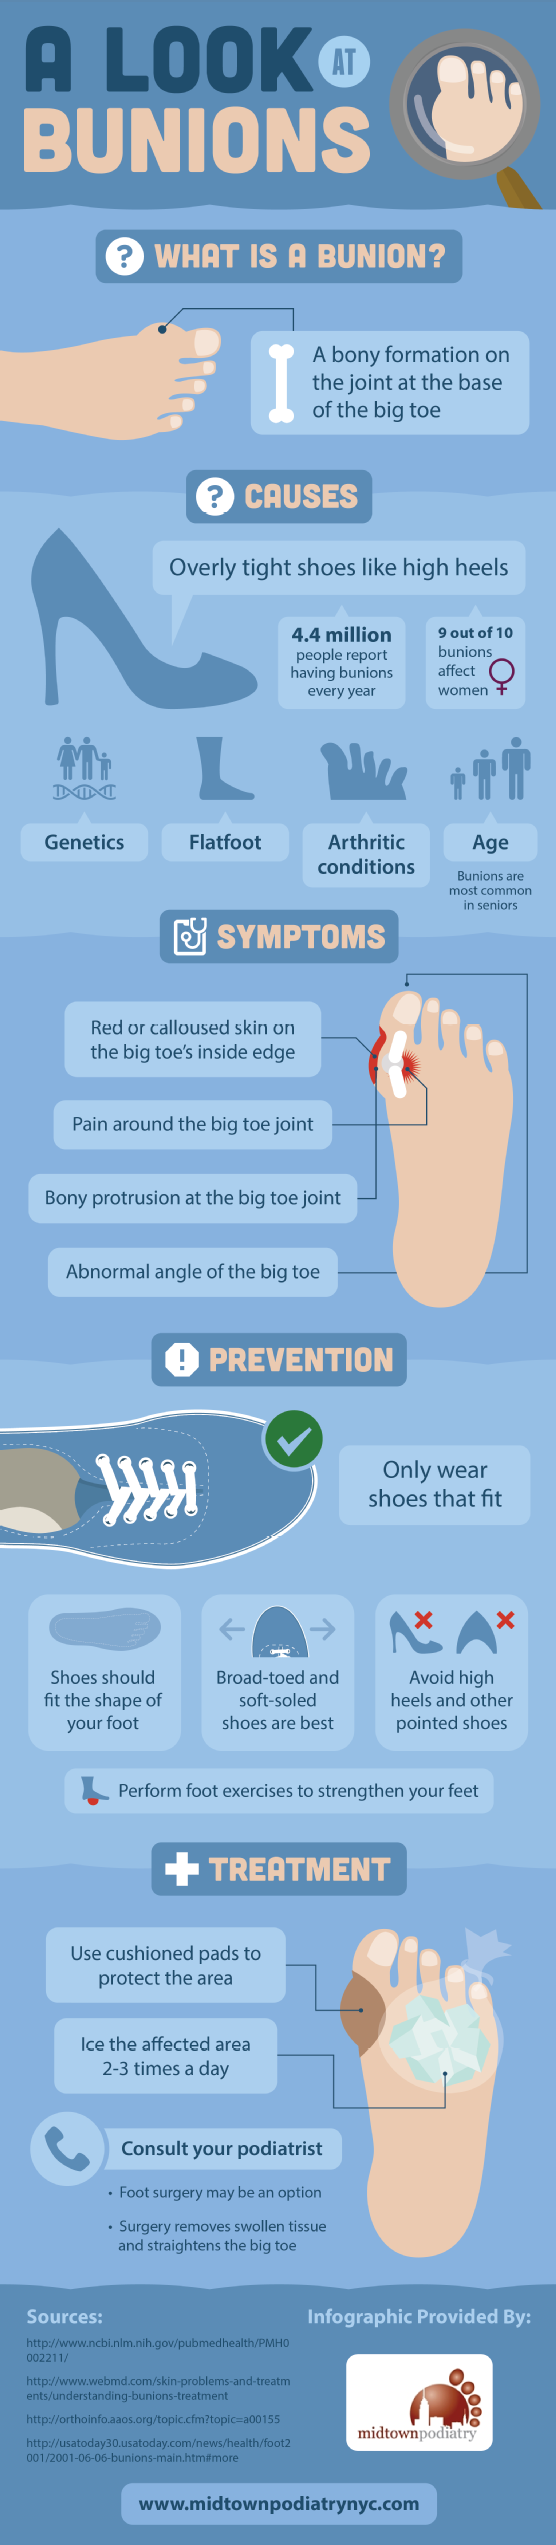 Guide to Bunions